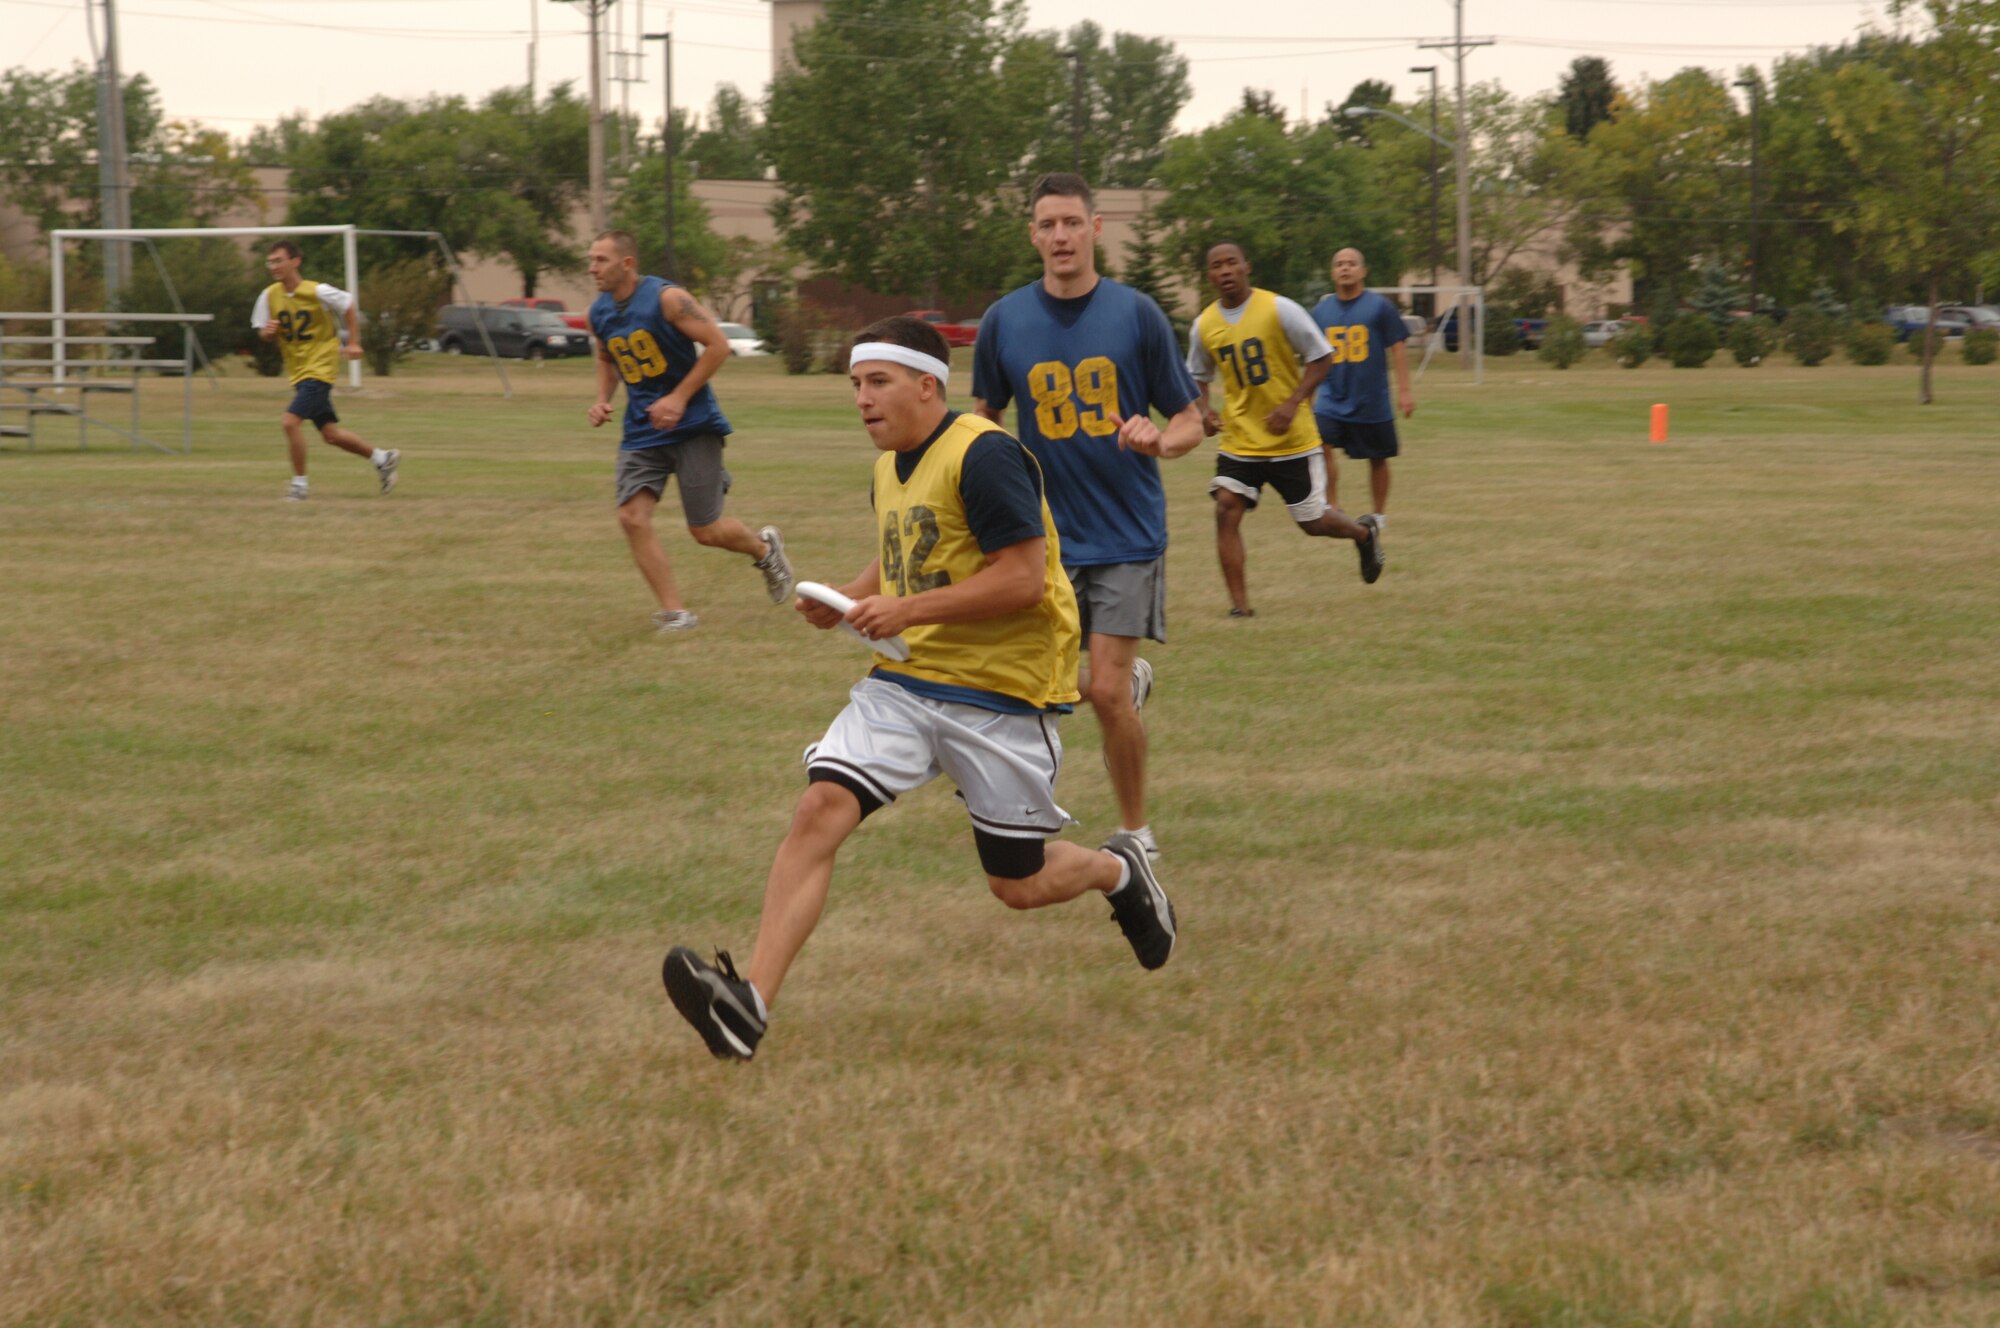 Members of the 319th Logistics Readiness and 319th Comptroller Squadron face off in a game of ultimate flying disk during the Grand Forks Air Force Base Summer Bash on August 26, 2007. The base personnel and family members participated in several sports including basketball, bowling and horse shoes.  (U.S. Air Force photo/Airman 1st Class Chad M. Kellum)